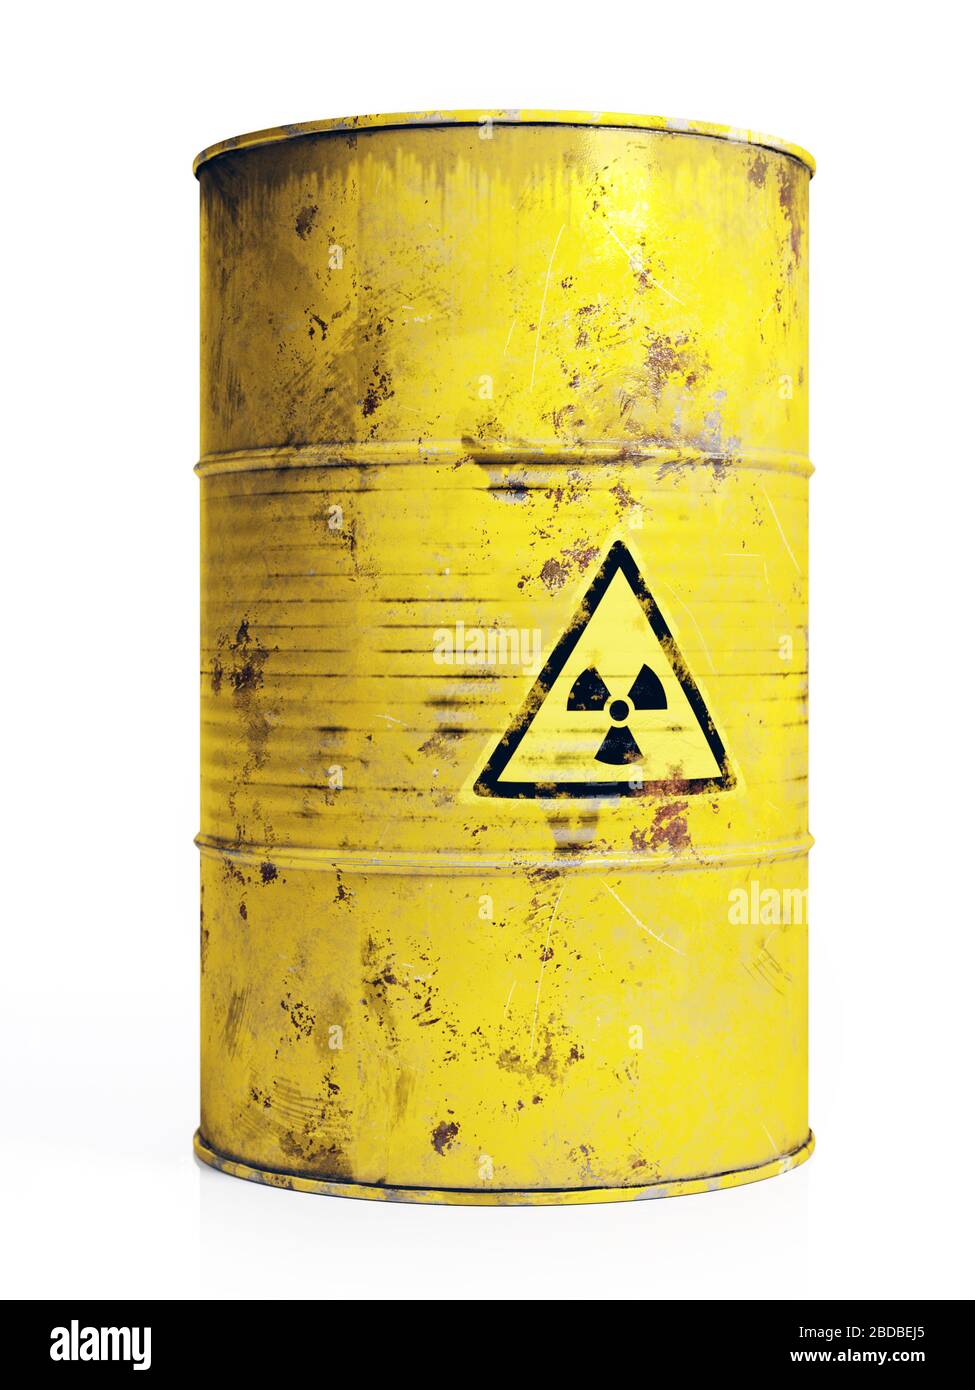 3D render of yallow metal barrel with radioactive substance on white background Stock Photo